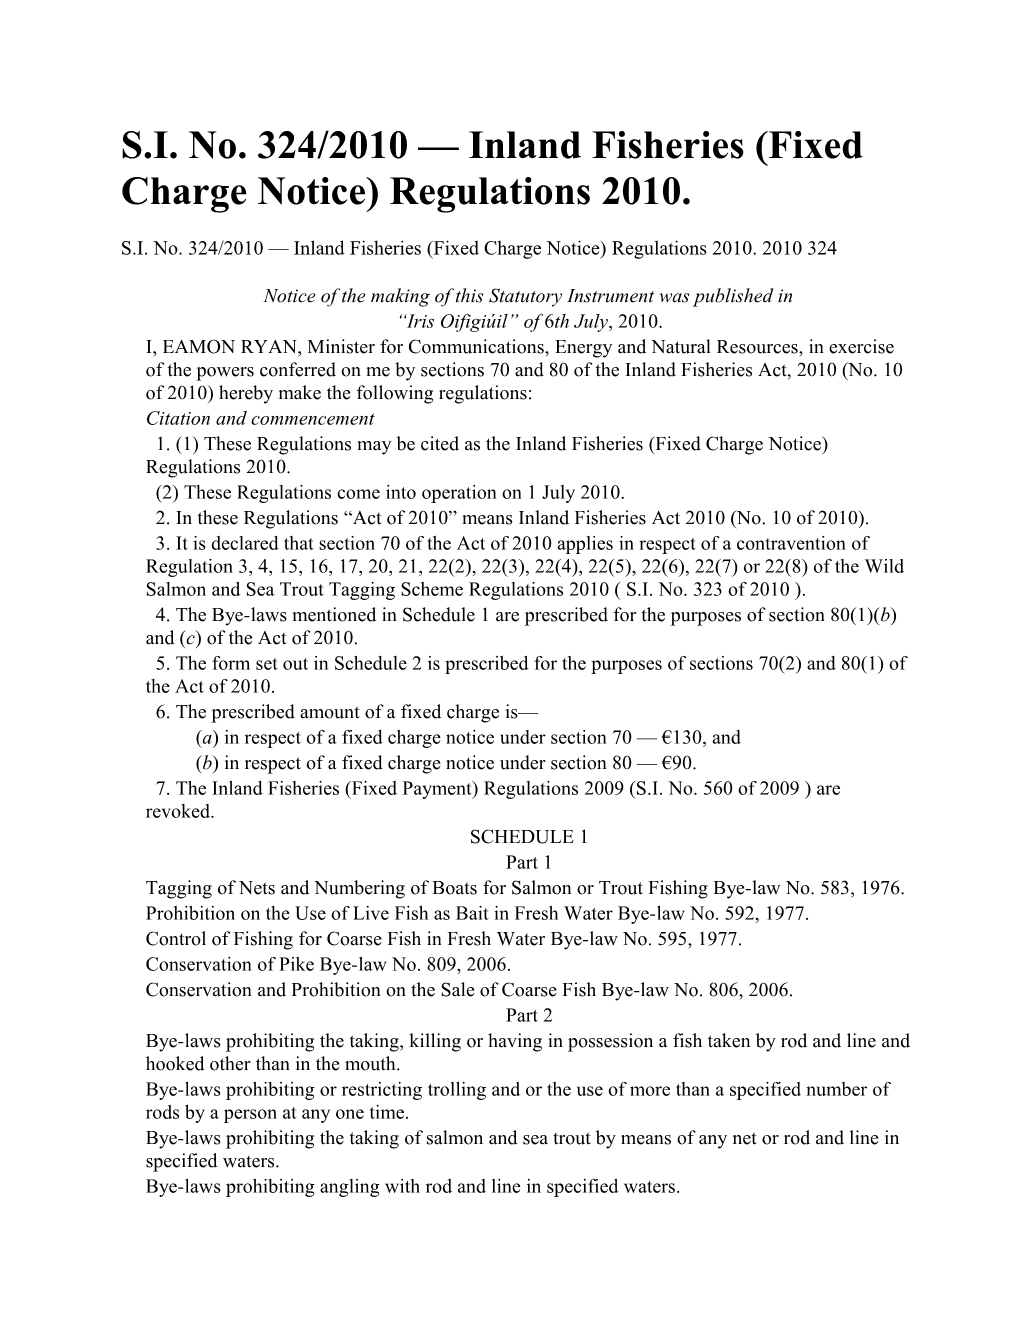 S.I. No. 324/2010 Inland Fisheries (Fixed Charge Notice) Regulations 2010